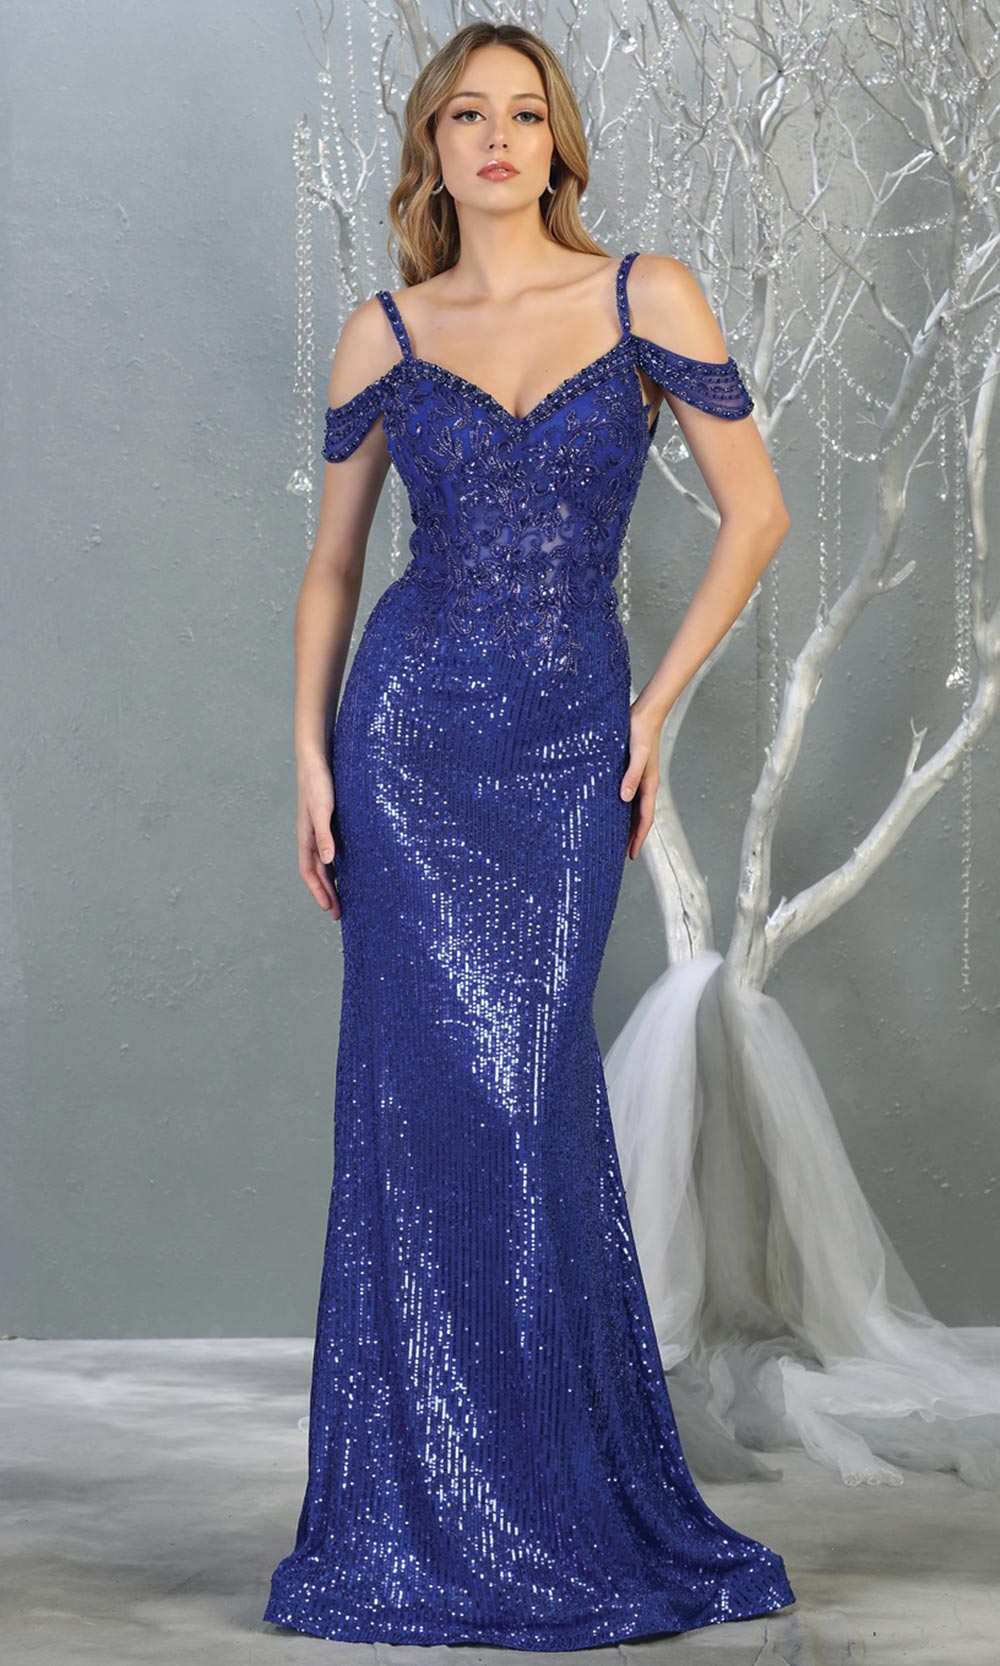 Mayqueen RQ7877 long royal blue sequin off shoulder evening mermaid dress. Full length sleek & sexy fitted dress is perfect for  enagagement/e-shoot dress, formal wedding guest, evening party dress, prom, black tie, gala. Plus sizes avail.jpg